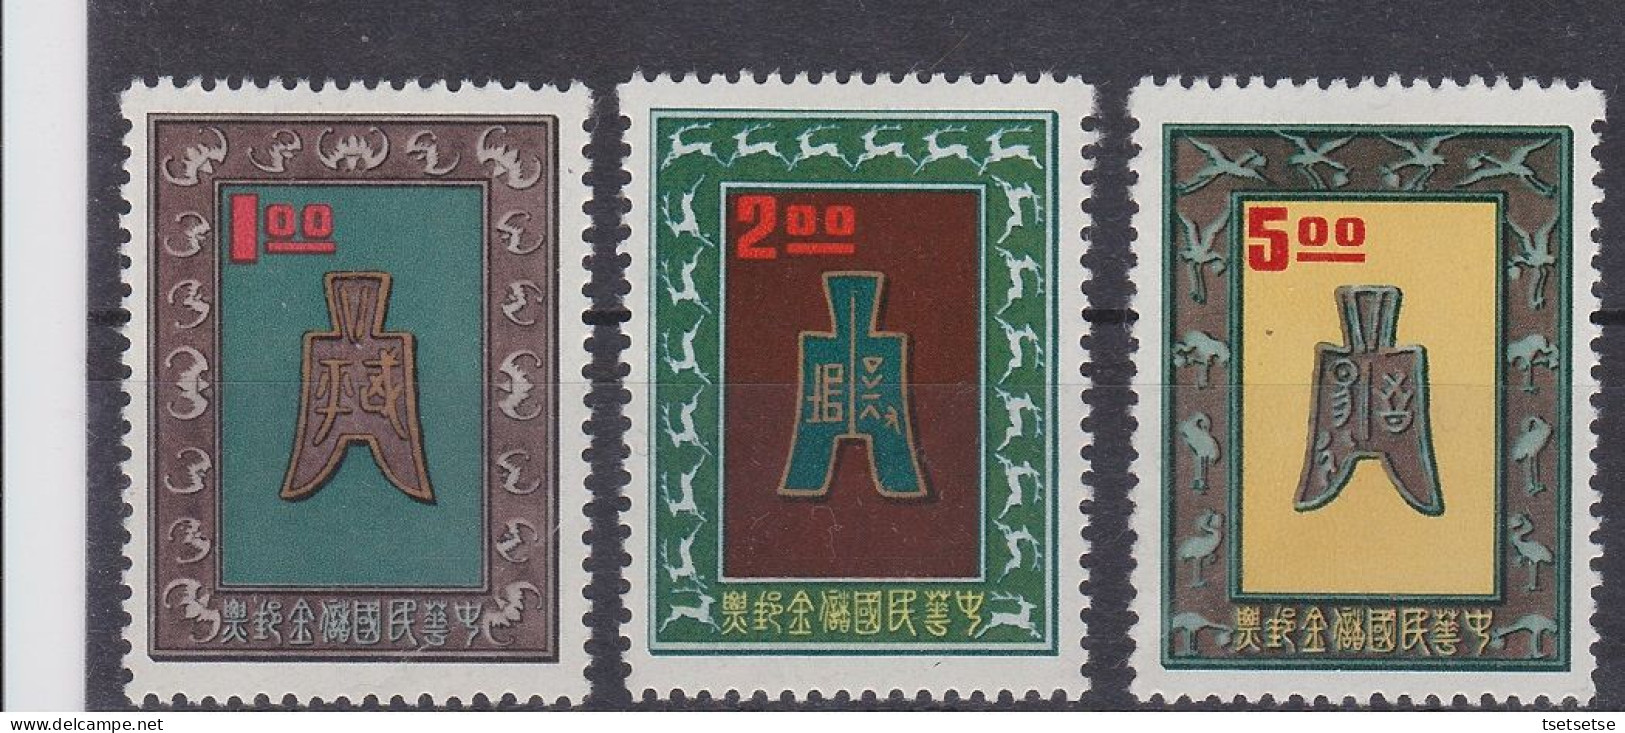 Scarce! 1962 Rep. Of China, Taiwan, Postal Savings Stamps, Set Of 3 Mint Unused, OG, No Stain - Unused Stamps